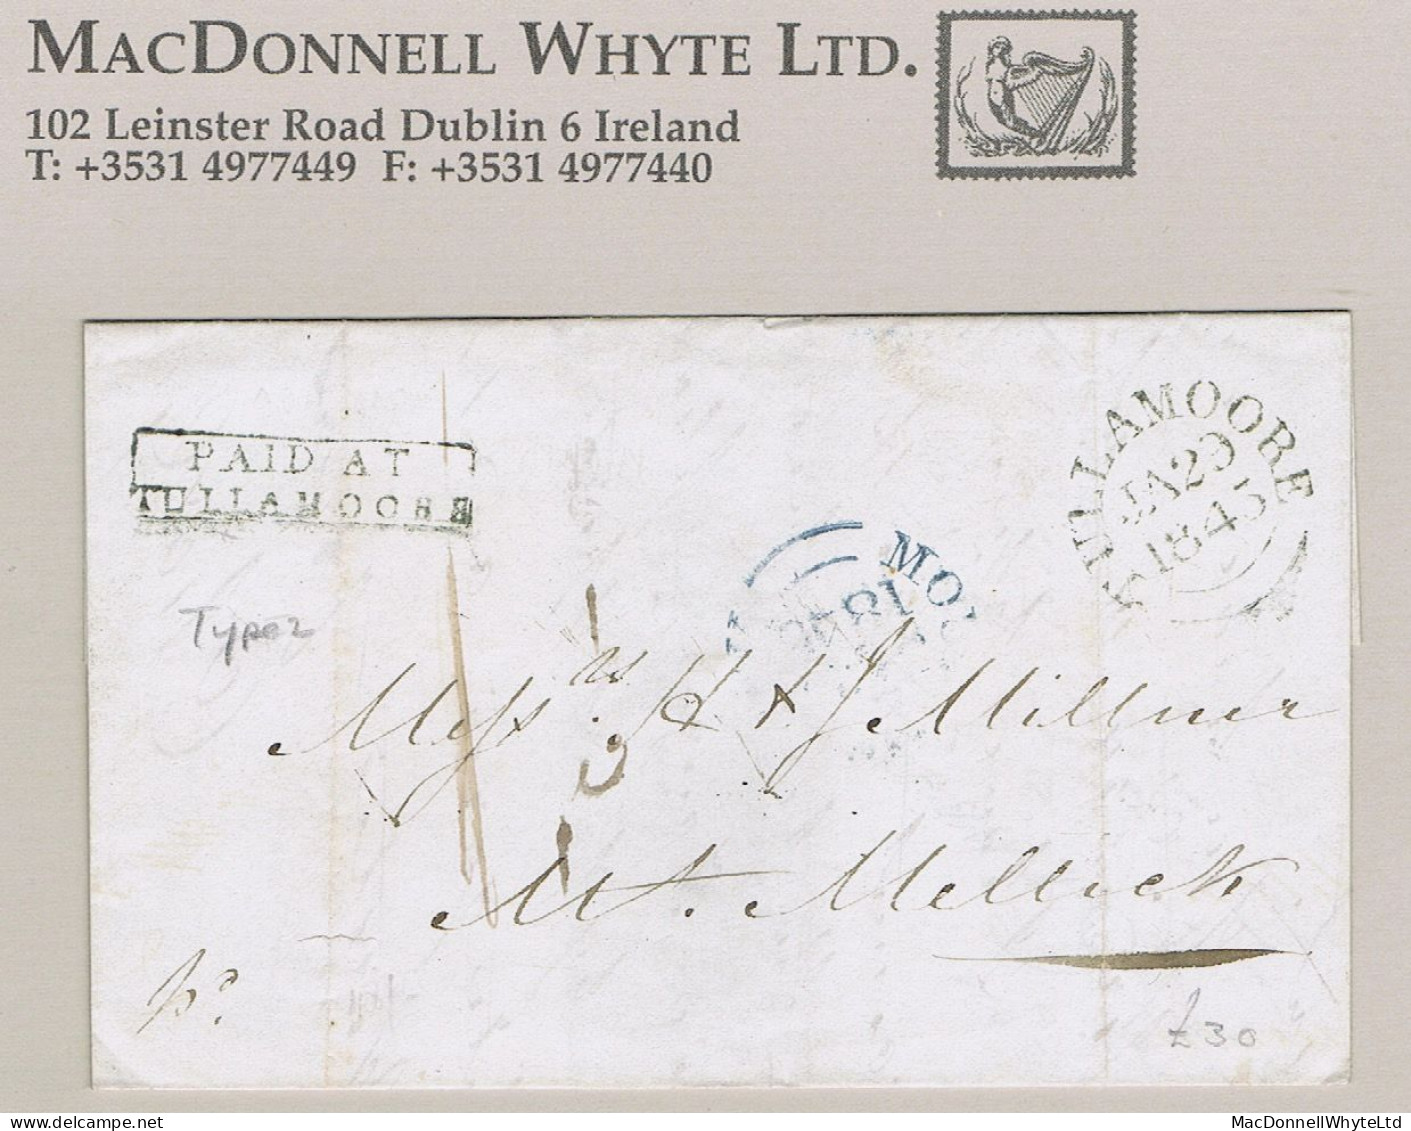 Ireland Offaly Uniform Penny Post 1845 Cover To Mountmellick With Boxed PAID AT/TULLAMOORE, TULLAMOORE JA 29 1845 - Prephilately